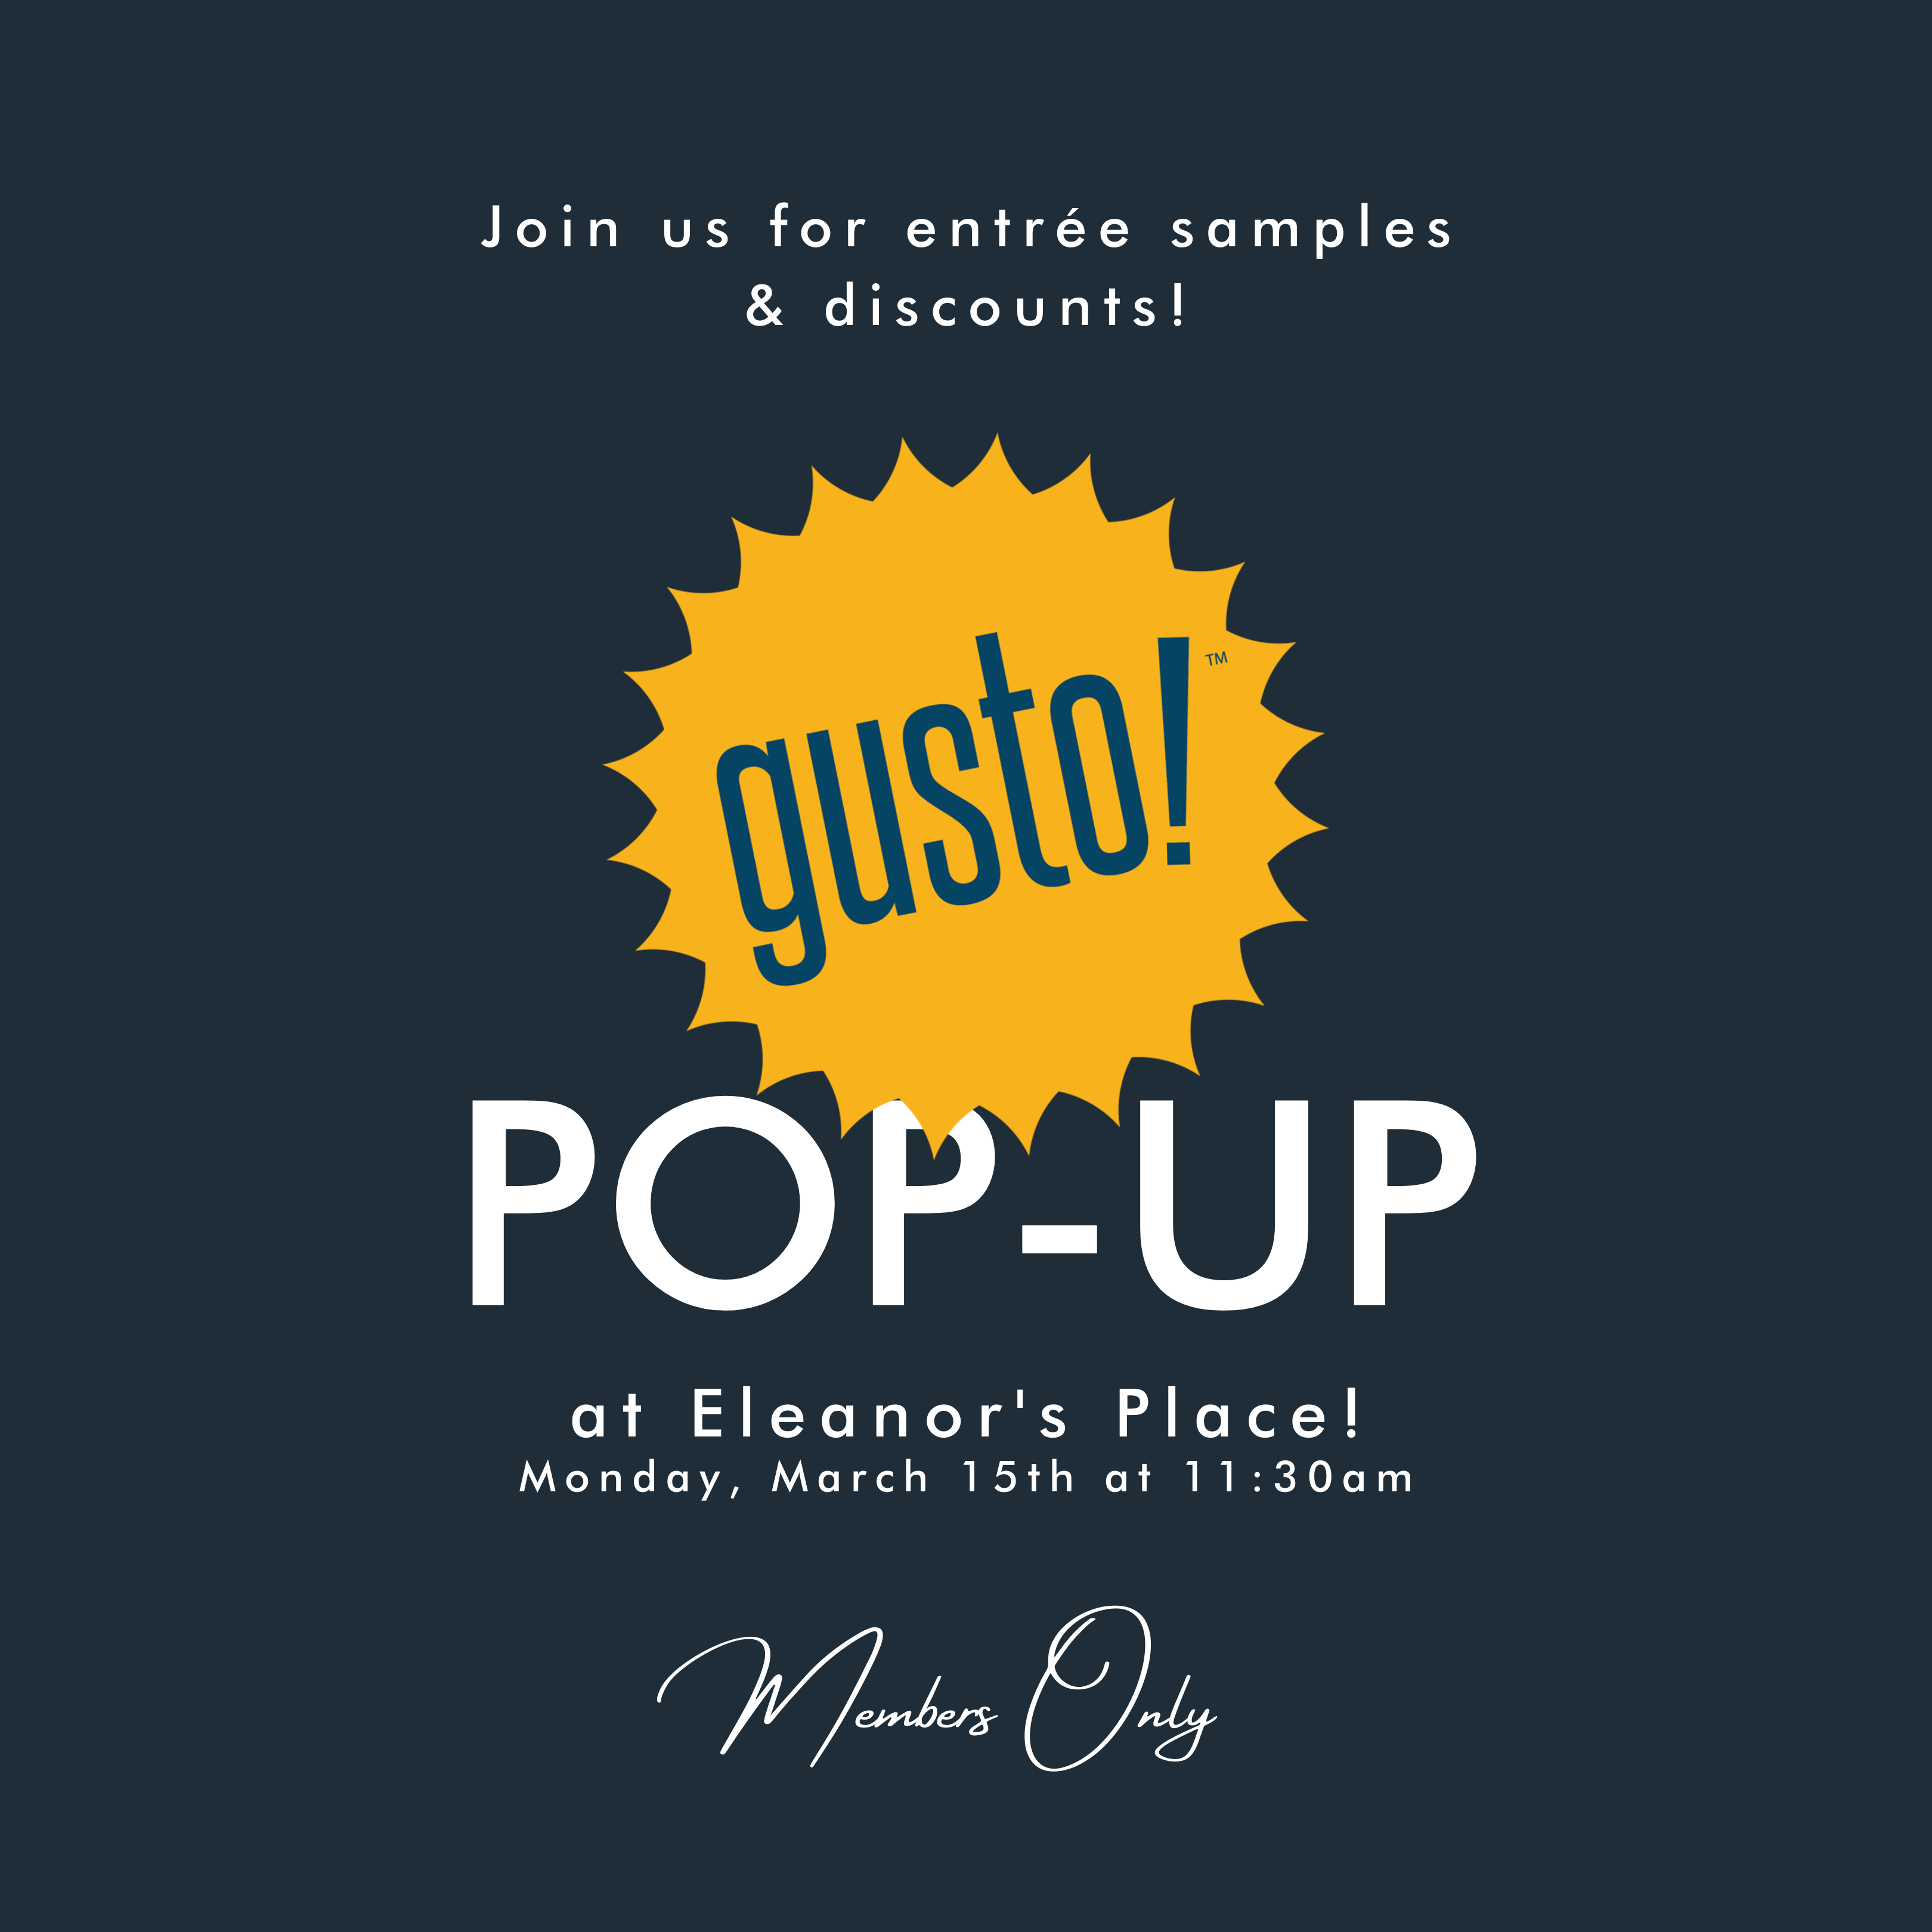 gusto! Pop-Up